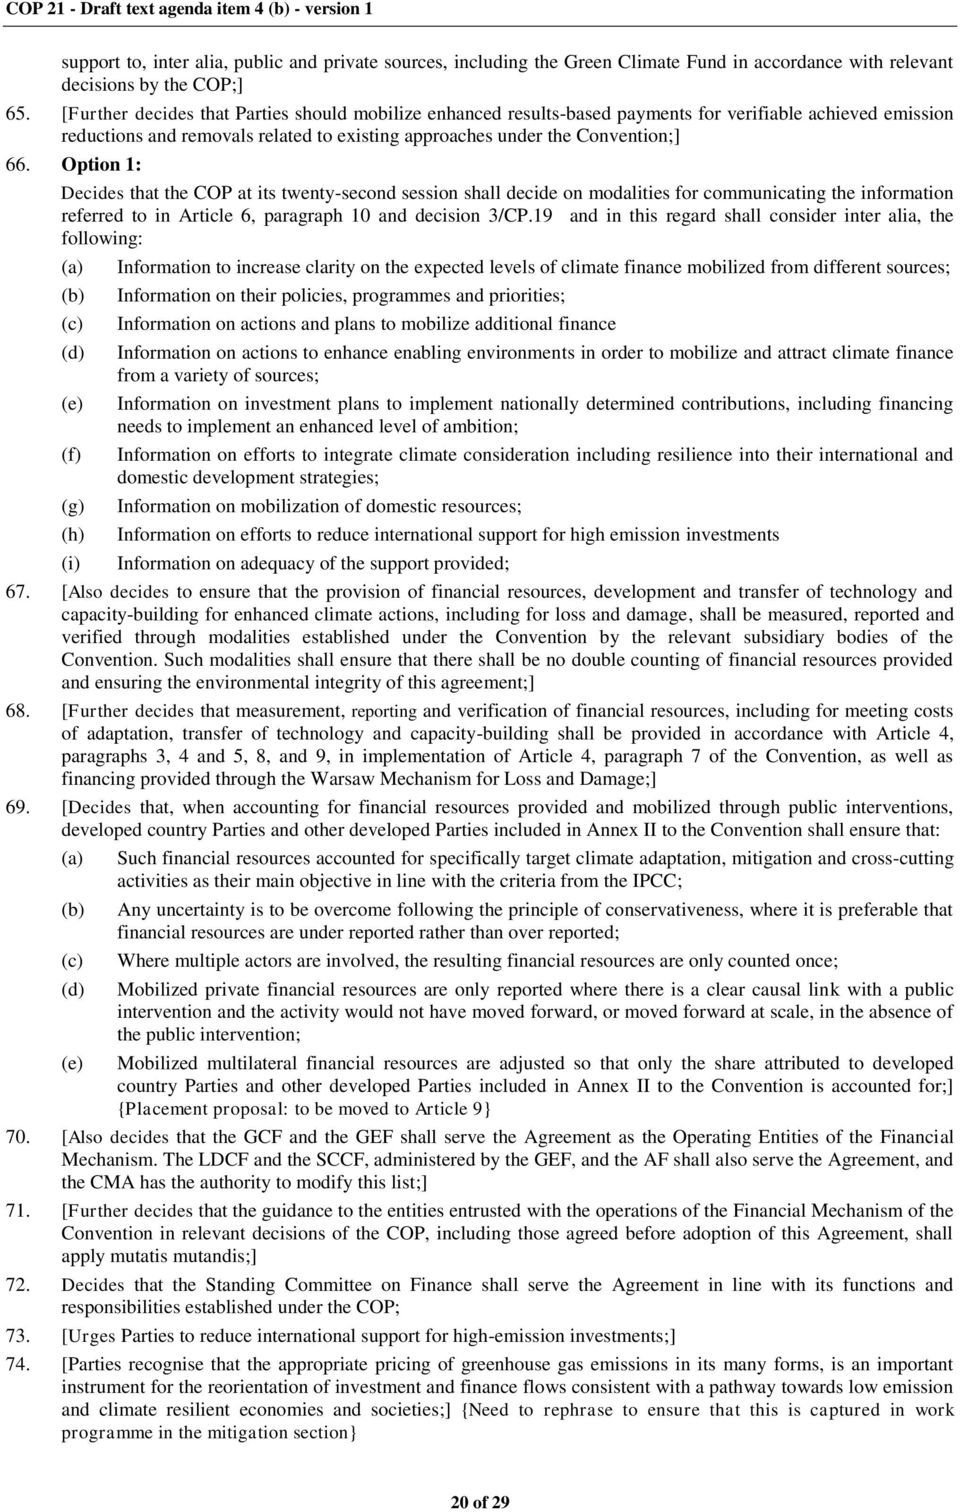 Option 1: Decides that the COP at its twenty-second session shall decide on modalities for communicating the information referred to in Article 6, paragraph 10 and decision 3/CP.